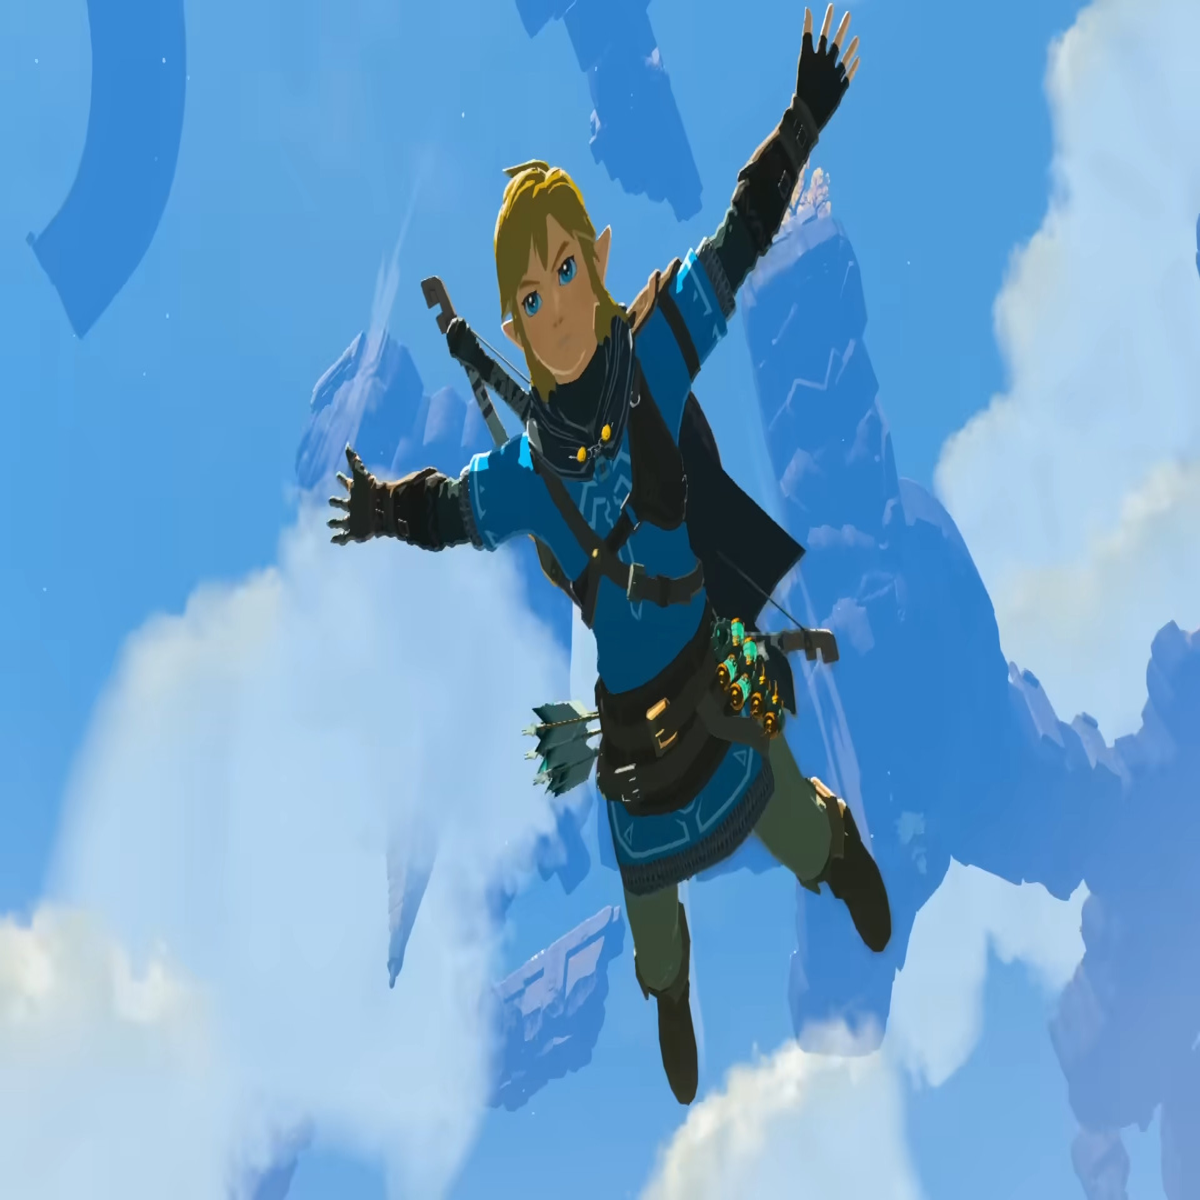 BREATH OF THE WILD 2 Sets Release Date and Actual Title for ZELDA